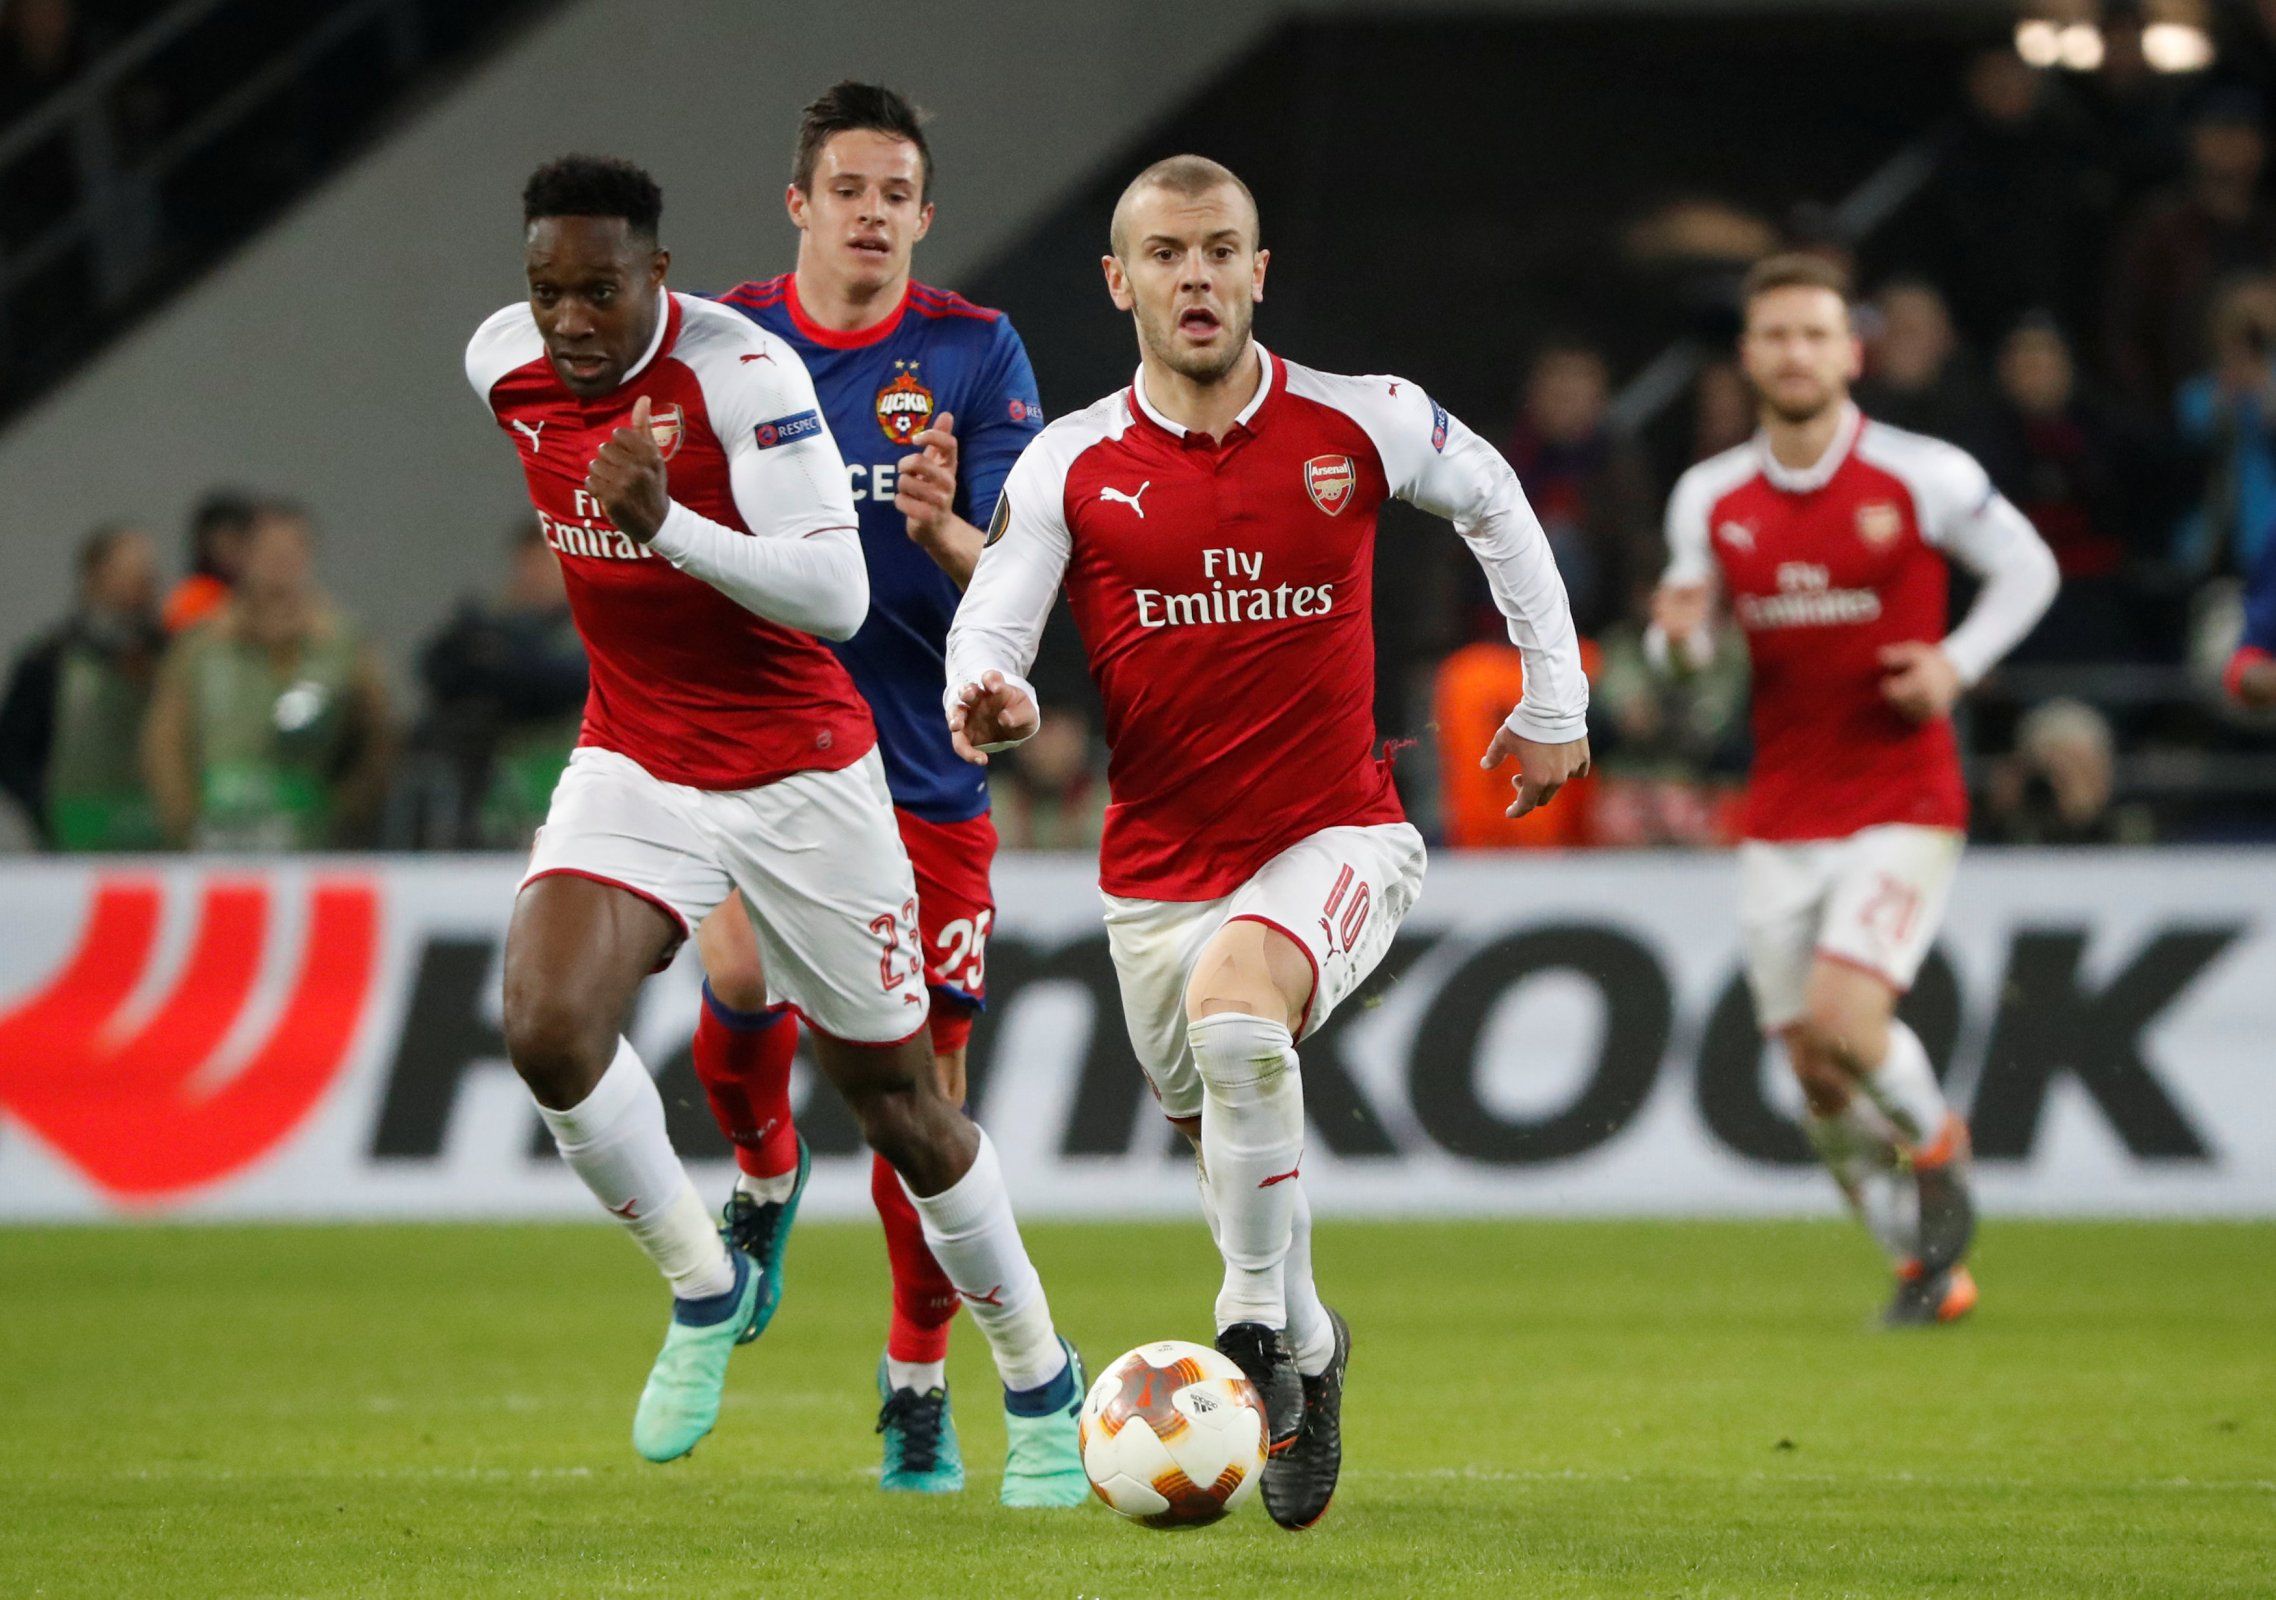 Jack Wilshere in action for Arsenal